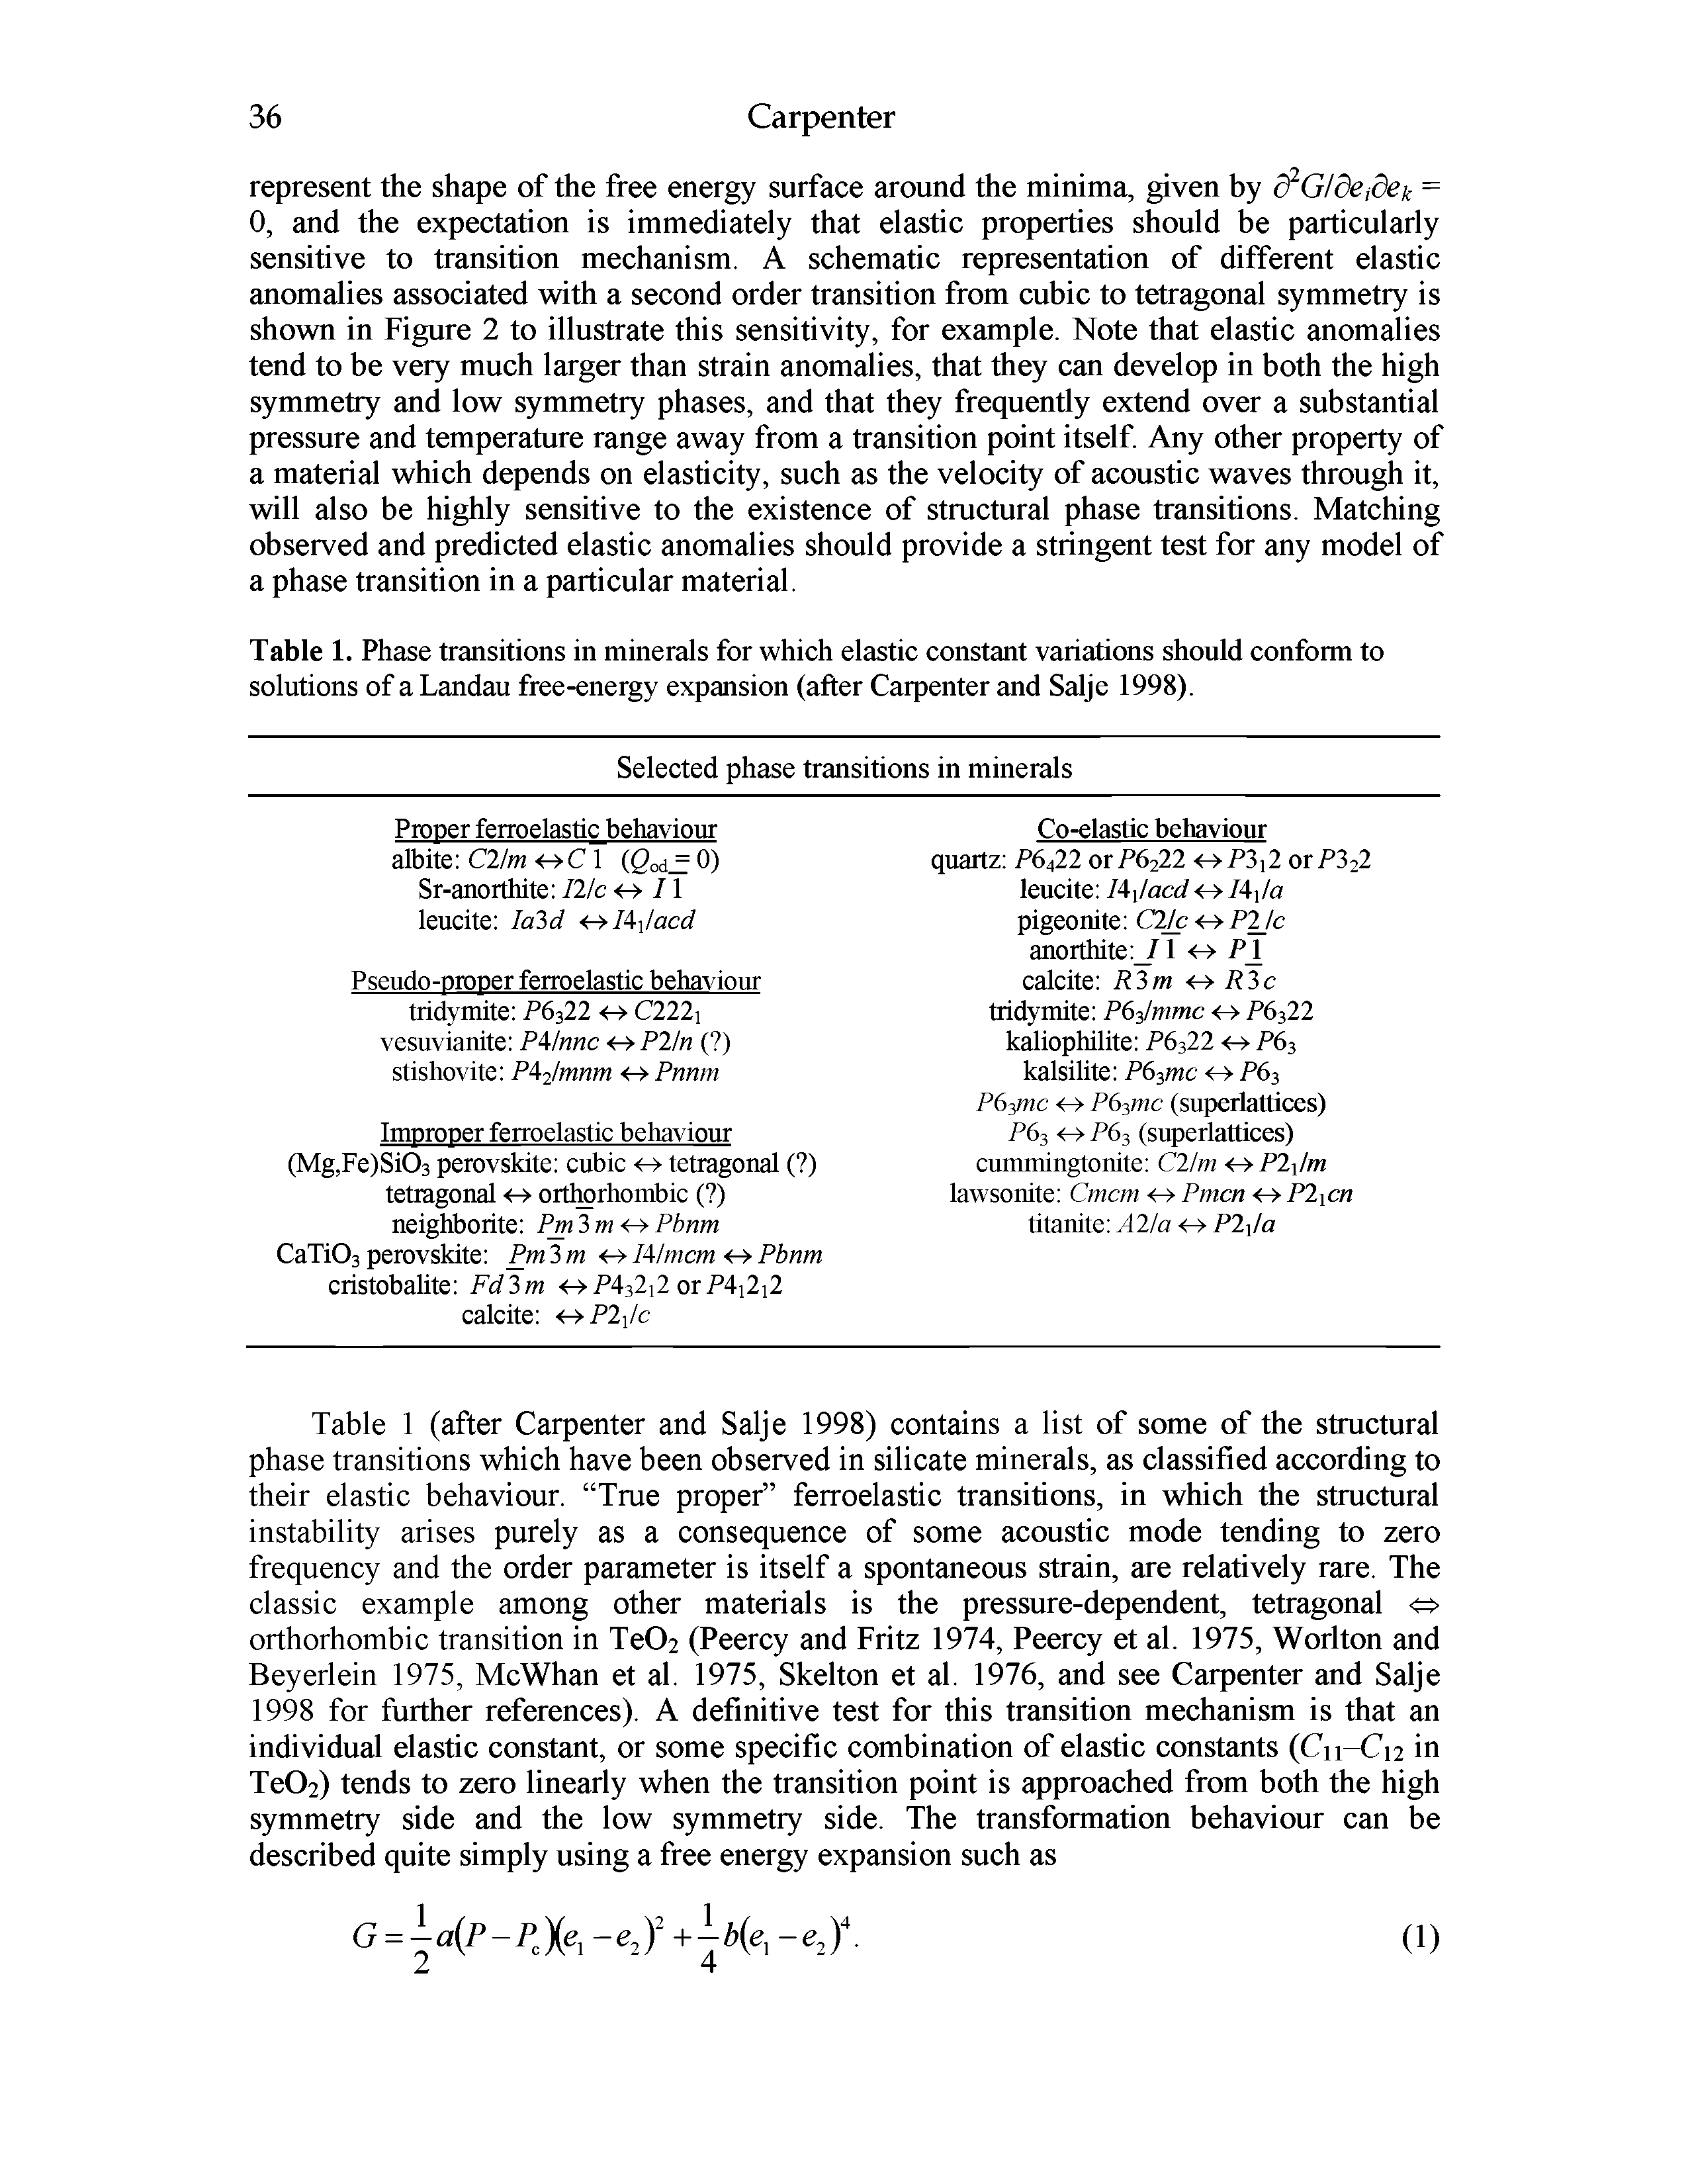 Table 1. Phase transitions in minerals for which elastic constant variations should conform to solutions of a Landau free-energy expansion (after Carpenter and Salje 1998).